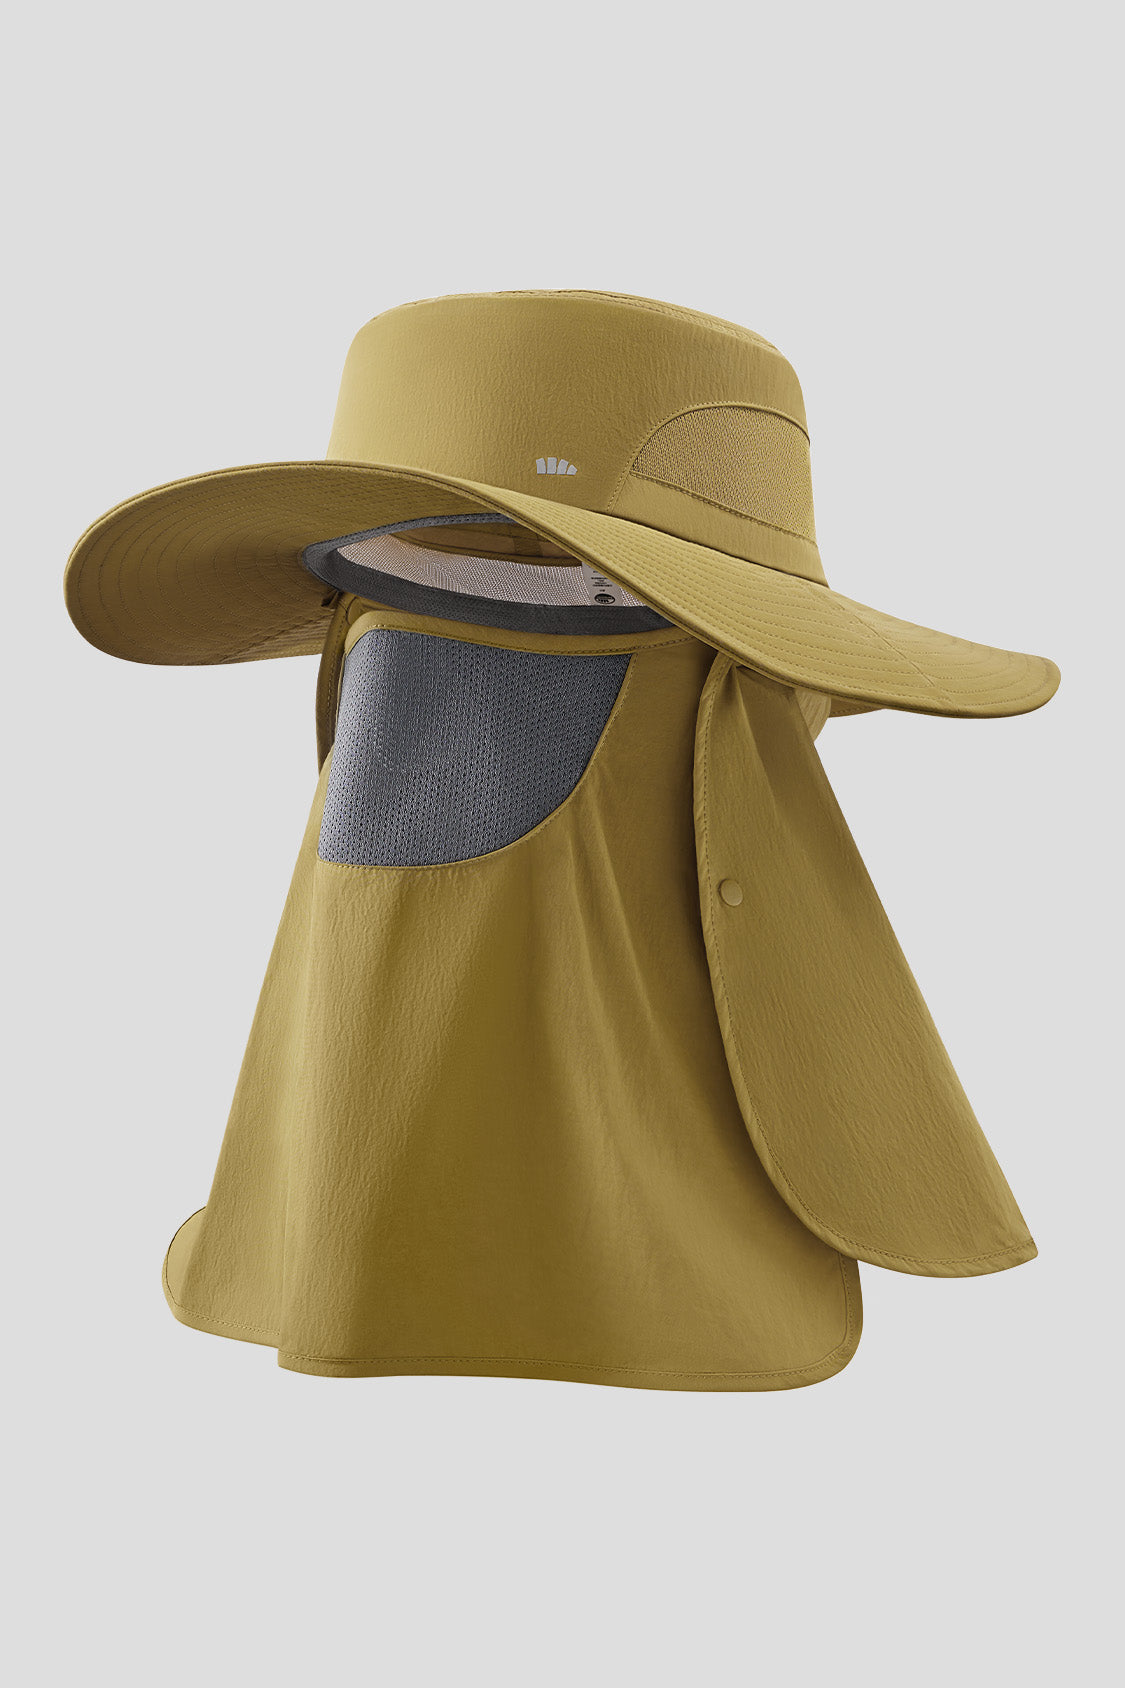 Cover - Men's Full Coverage Sun Protection Fishing Hat UPF50+ Wilderness Yellow / 58-60 cm